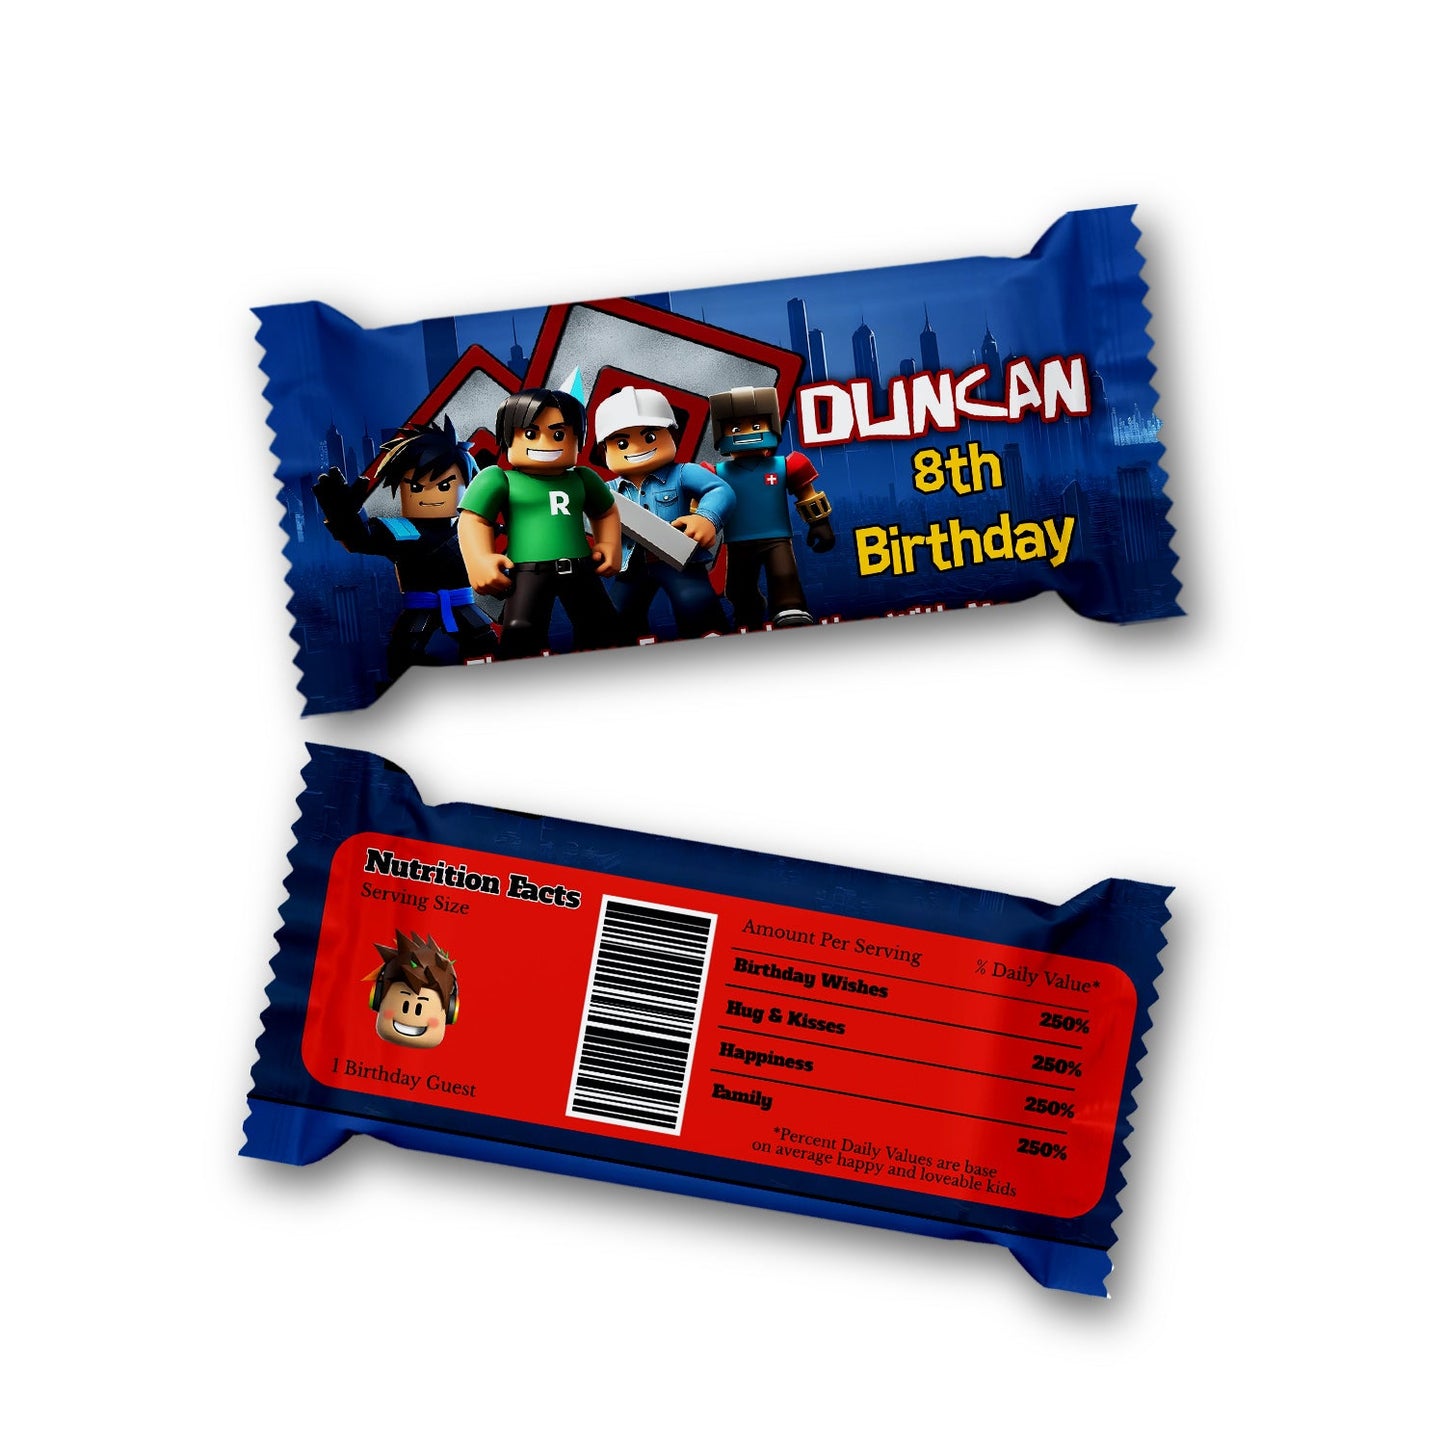 Roblox themed Rice Krispies treats label and candy bar label